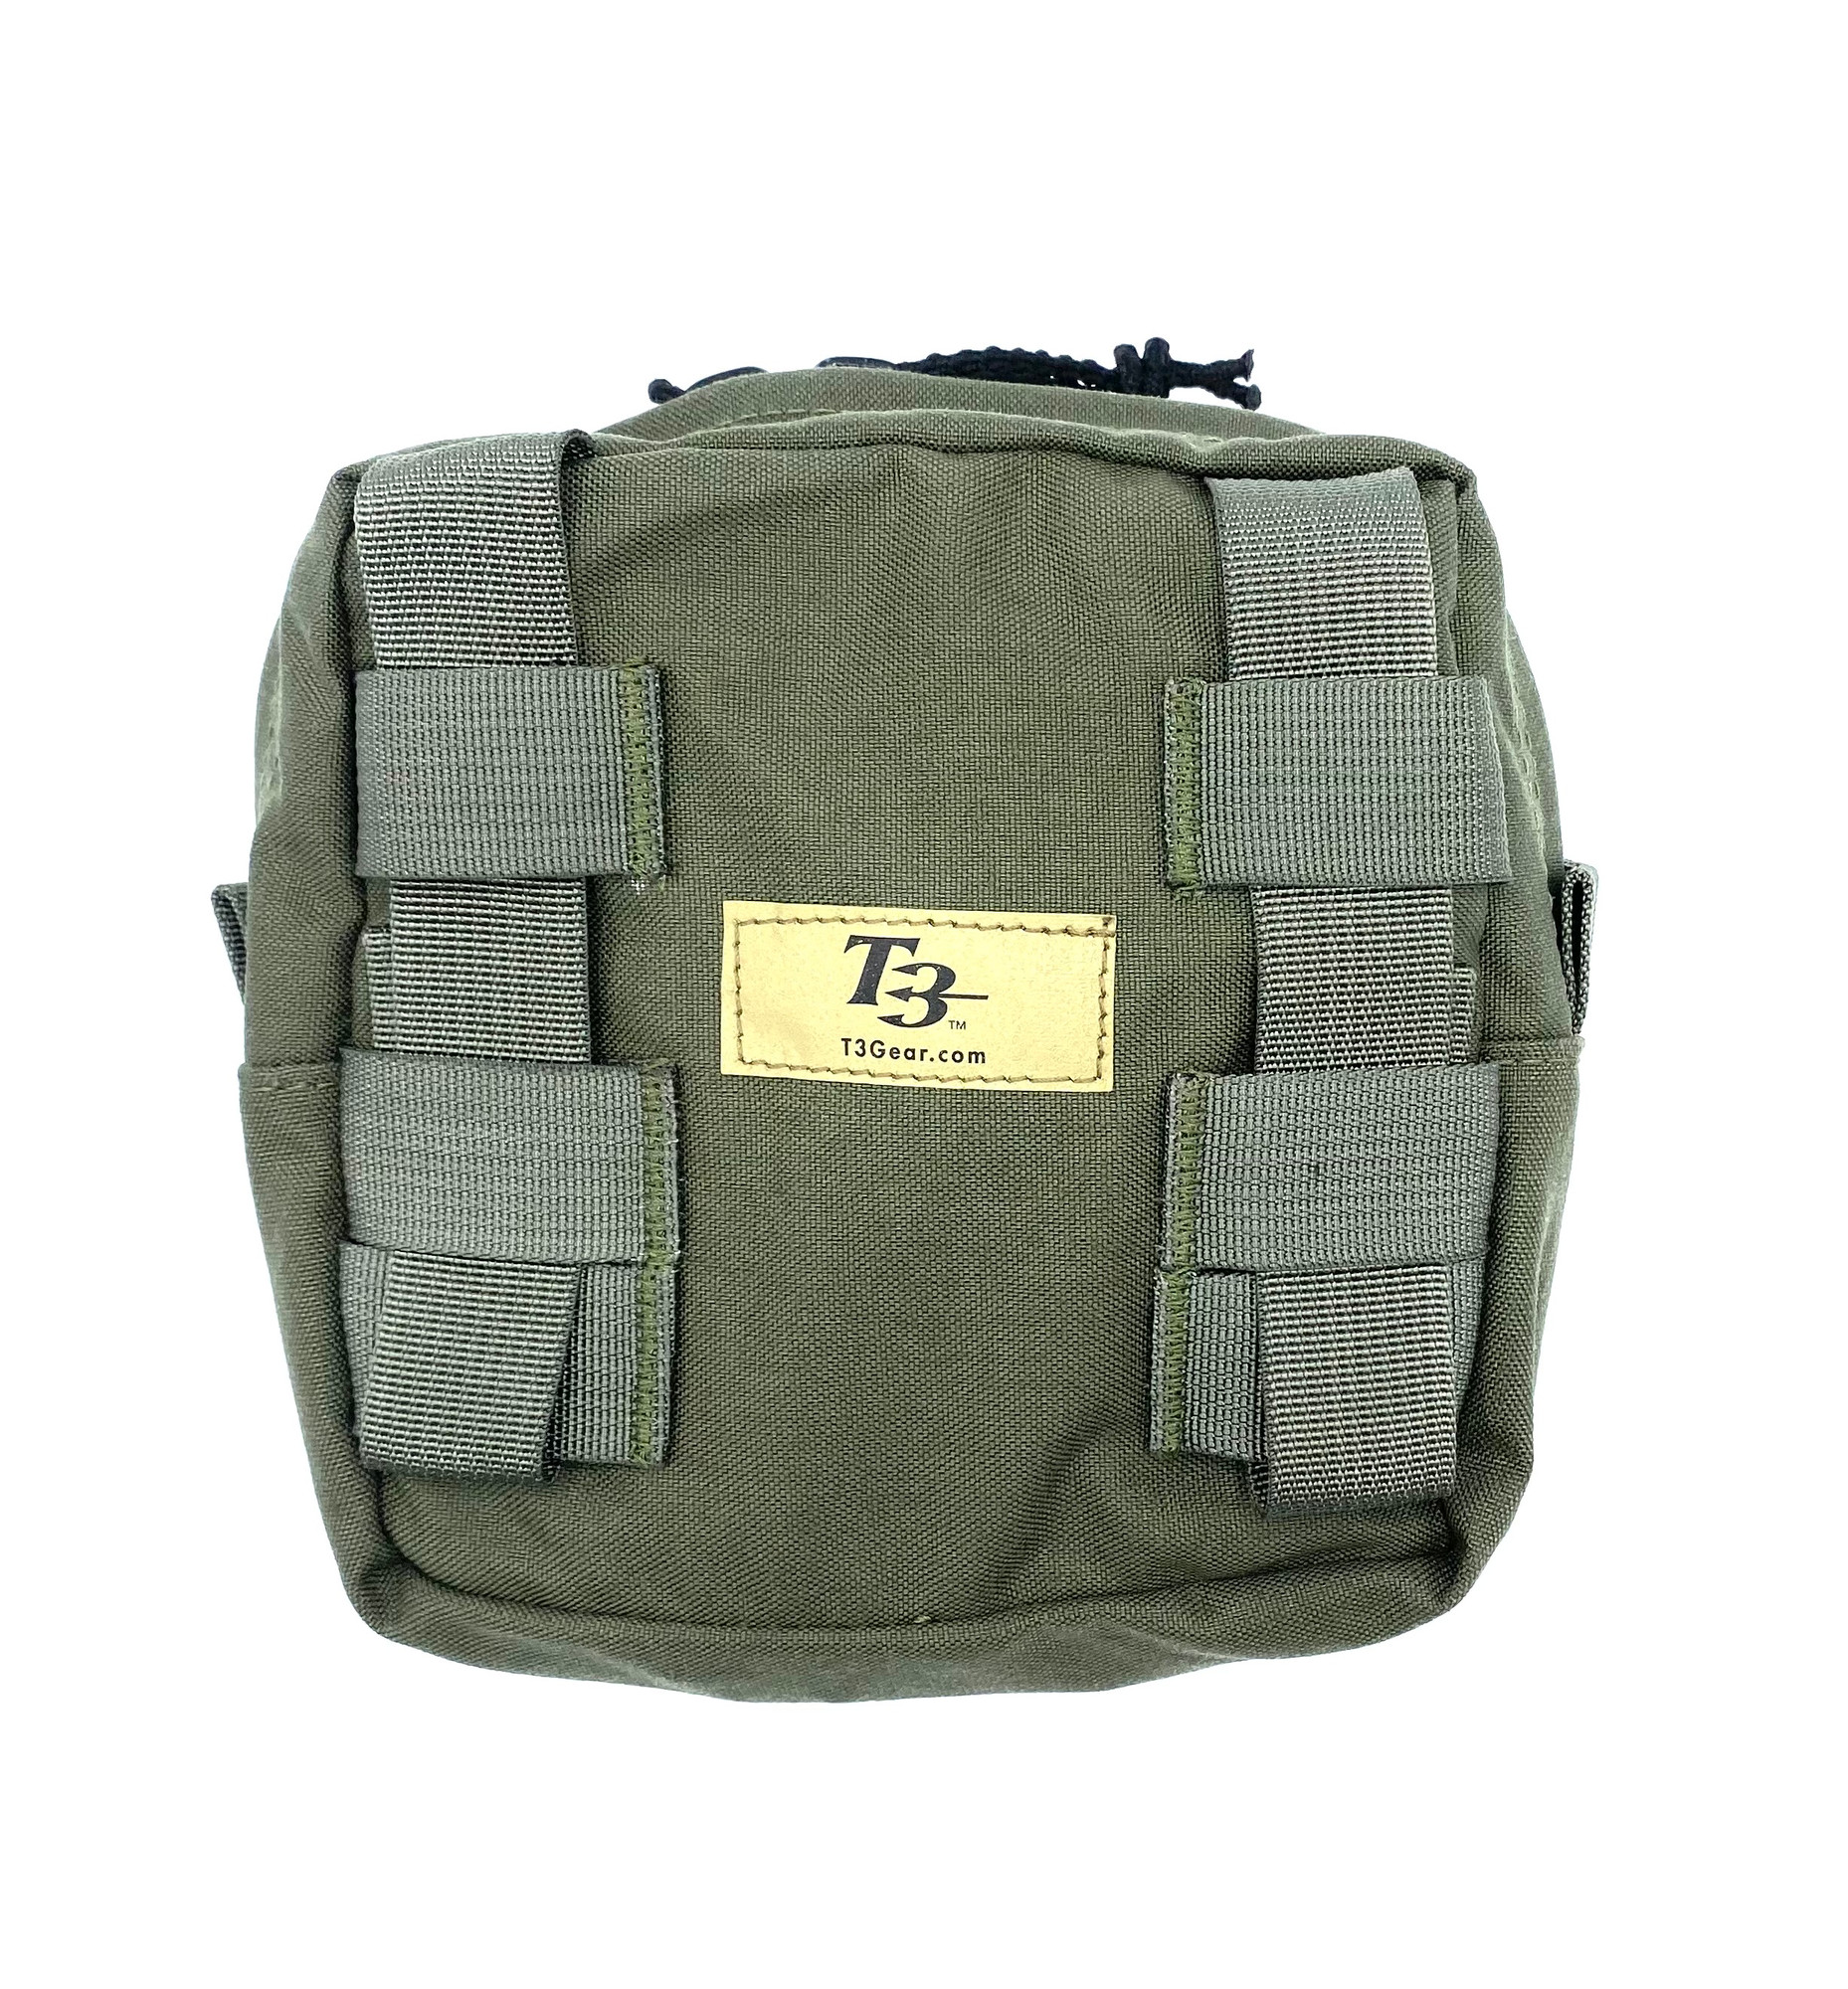 T3 Utility Pouch LC - T3 Gear